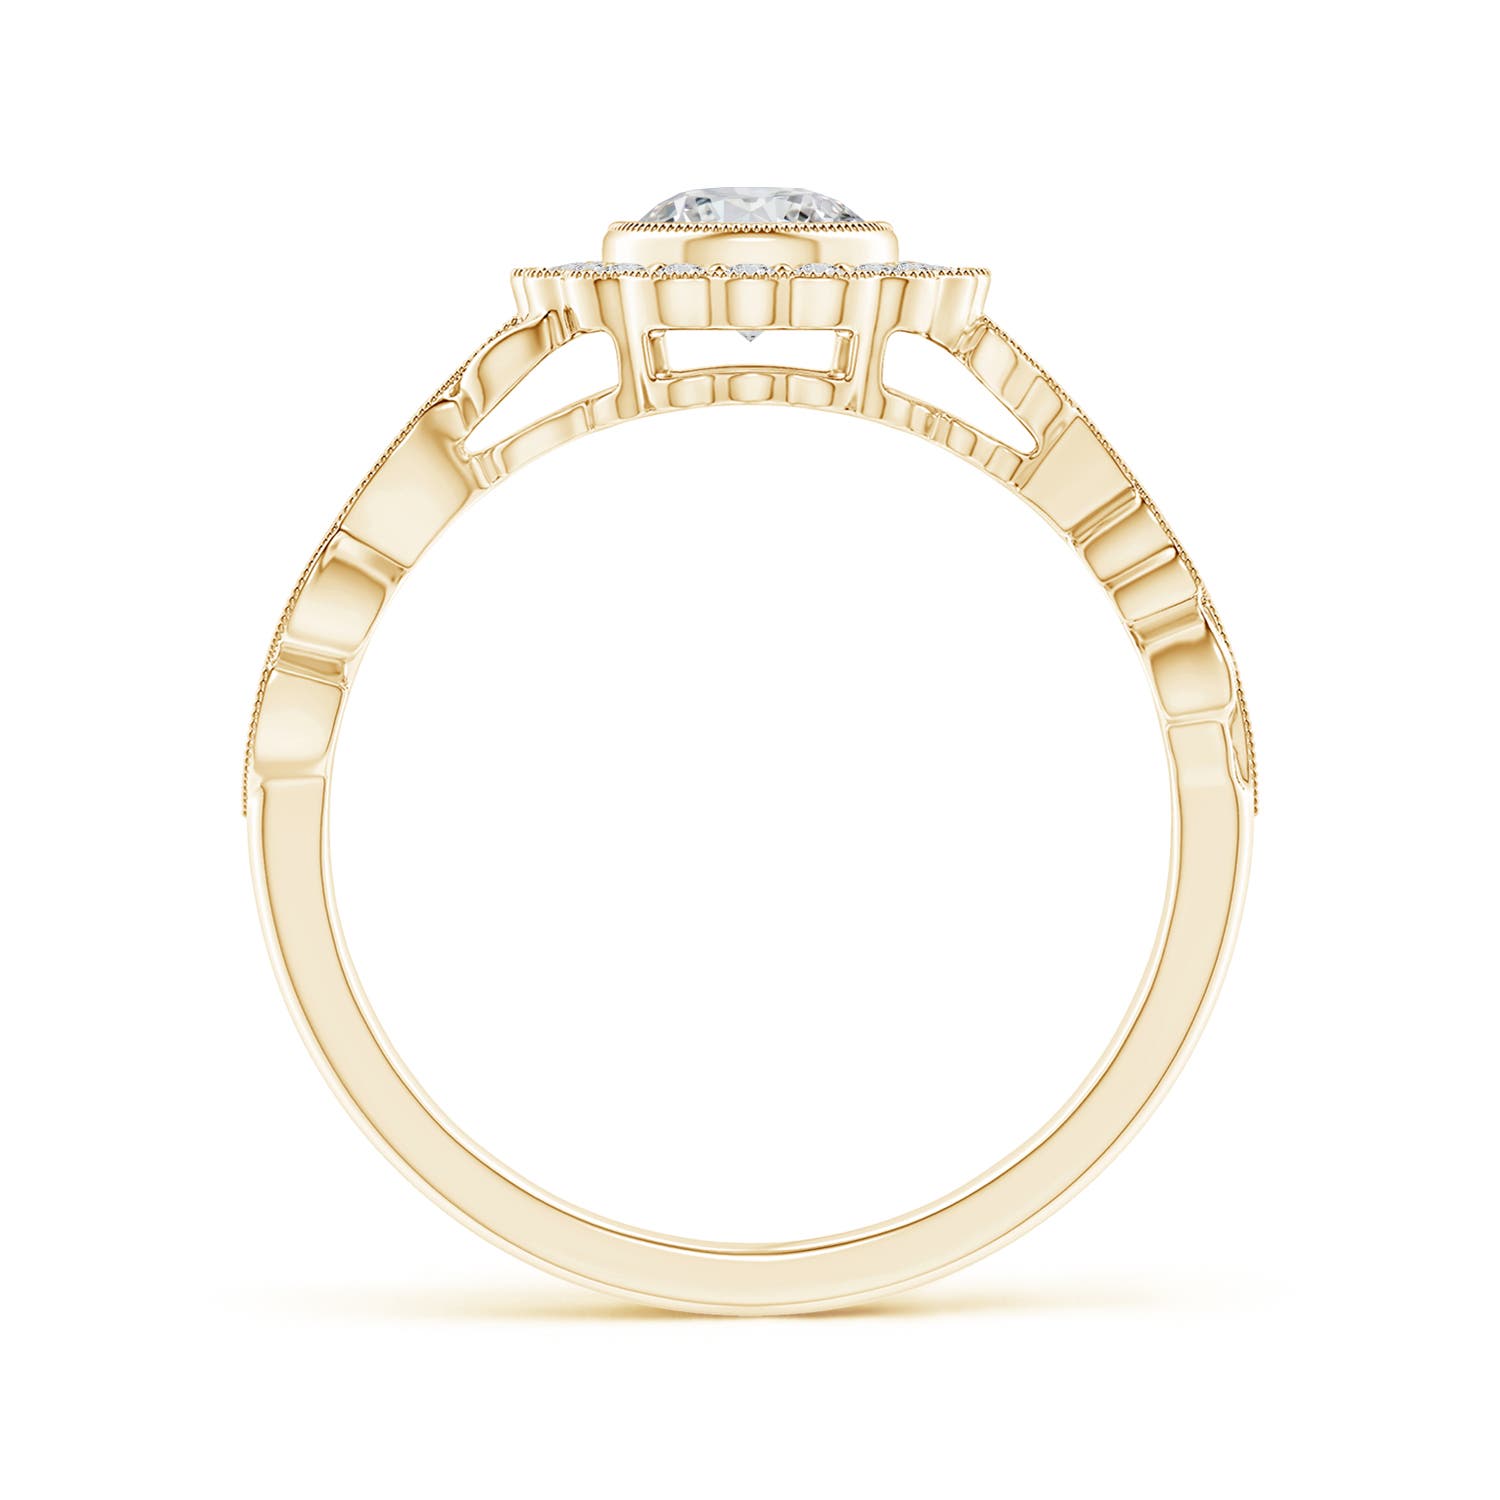 H, SI2 / 0.71 CT / 14 KT Yellow Gold